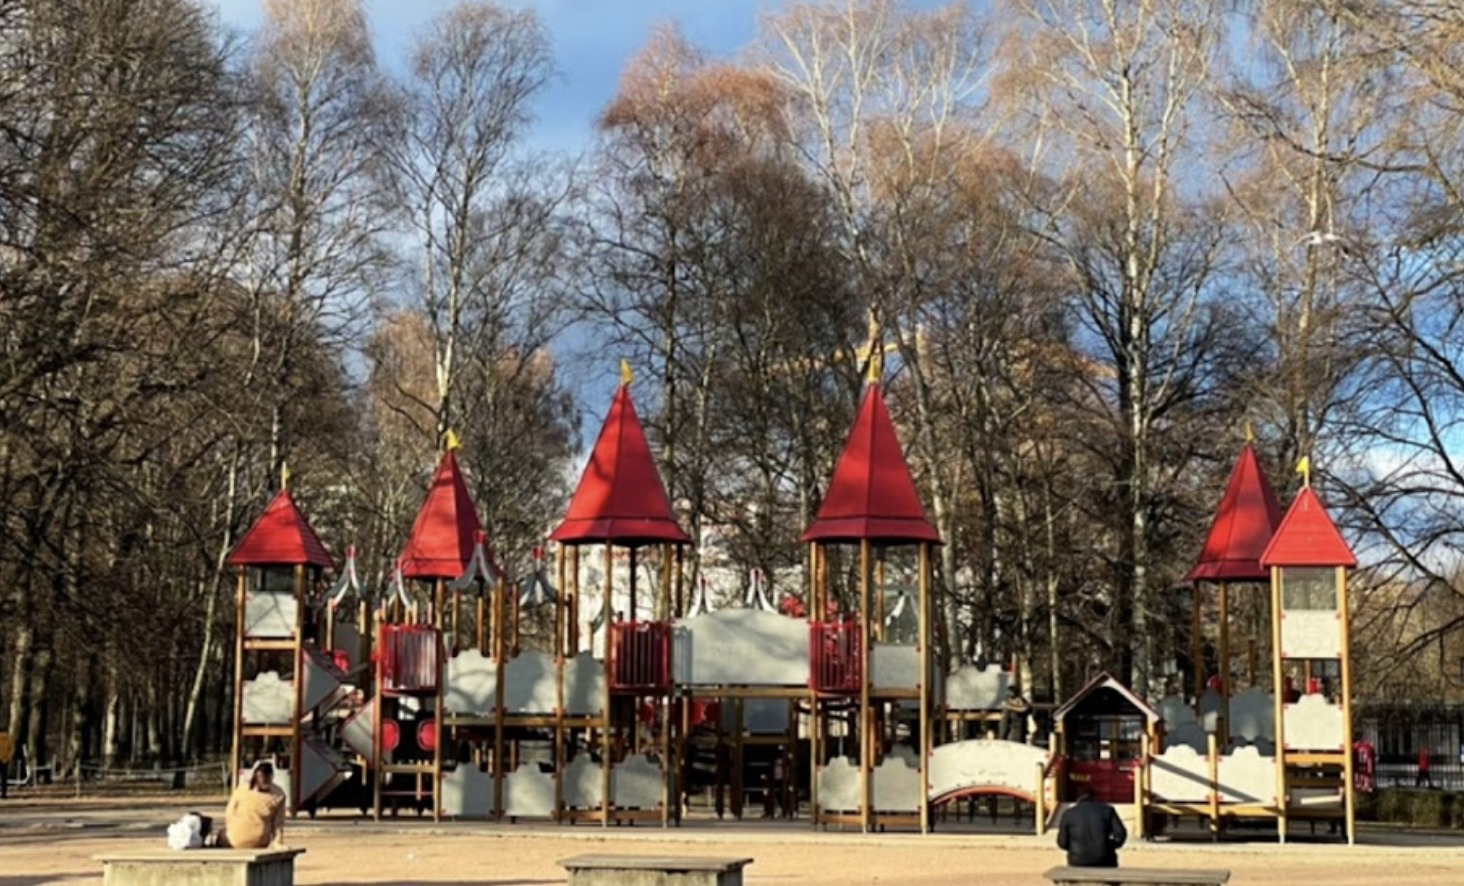 The Frogner Park Playground (near the main entrance)